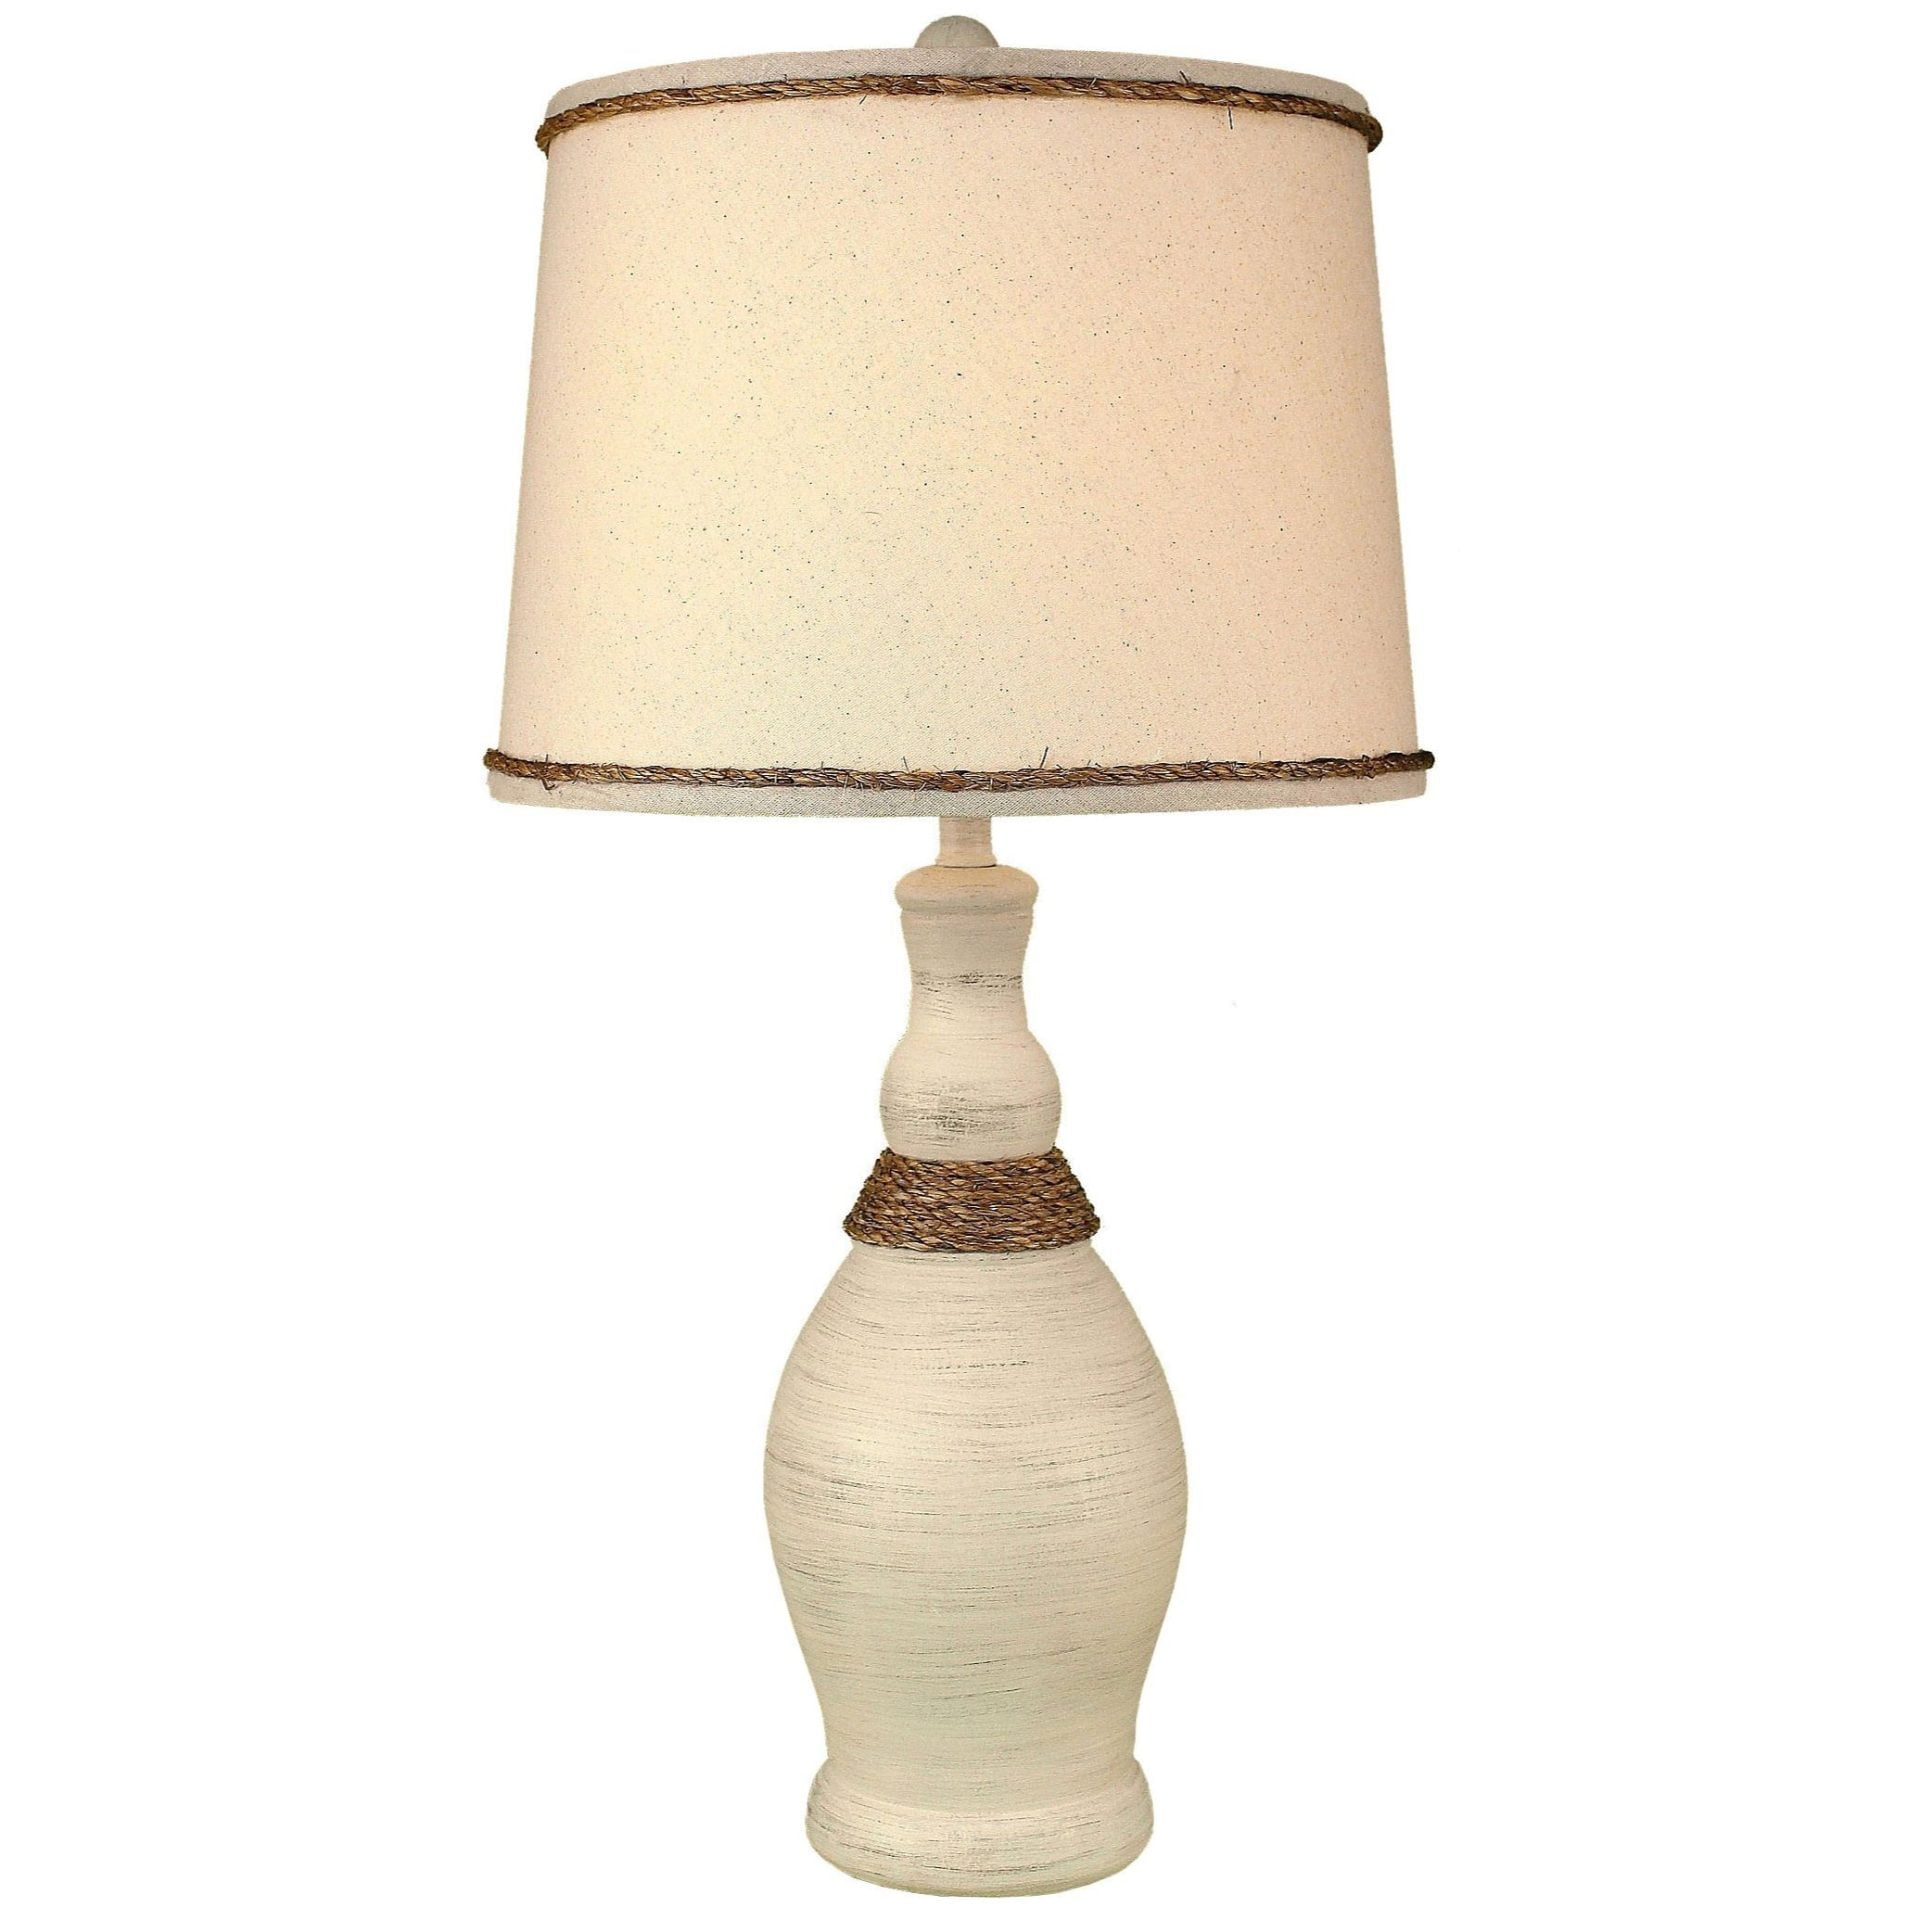 Slender-Neck Casual Table Lamp with Rope